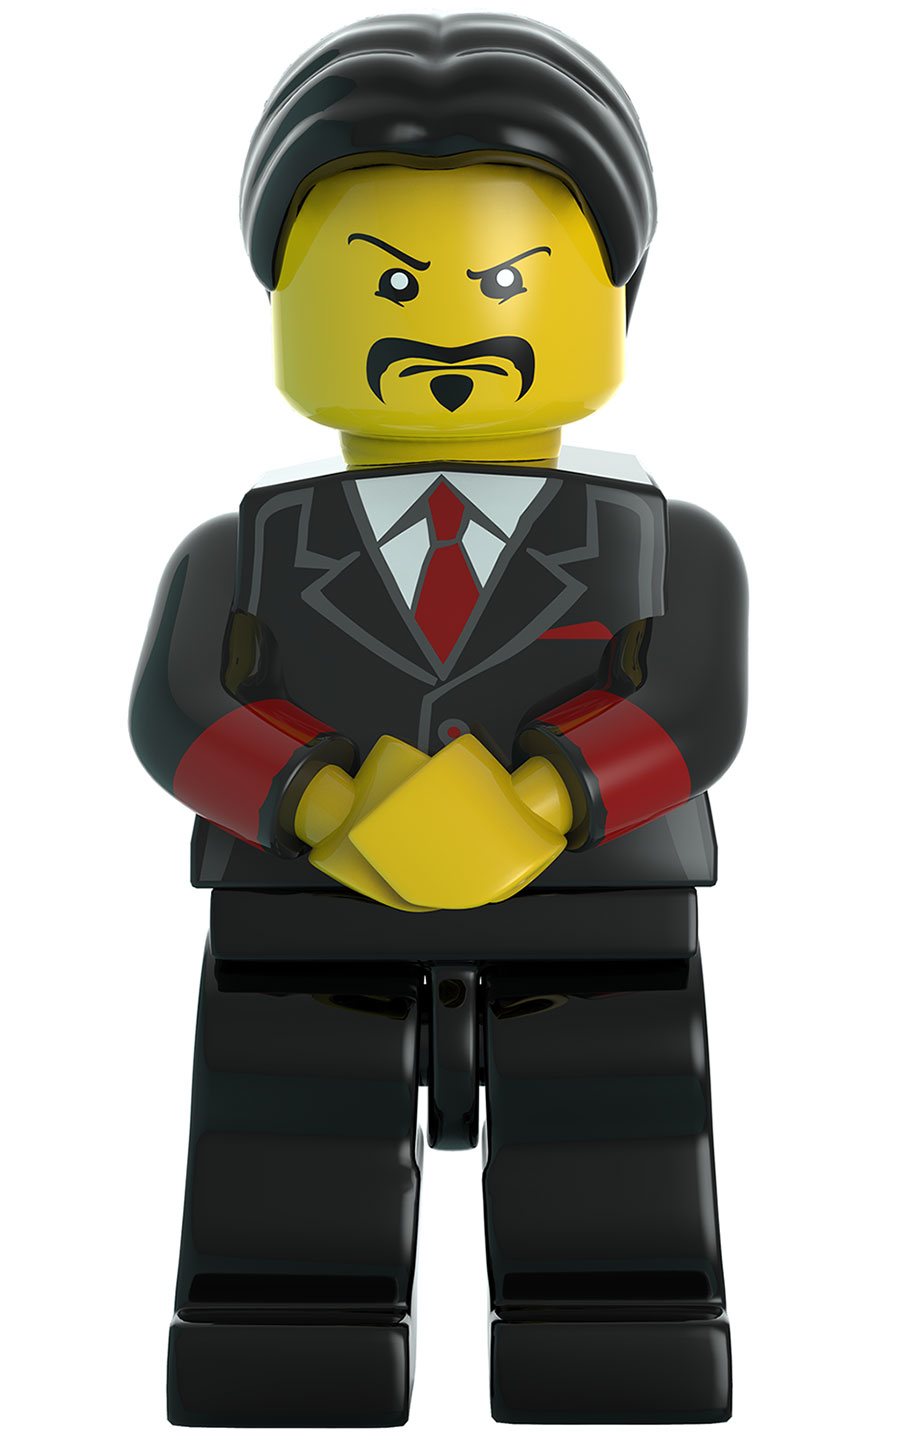 lego city undercover all characters